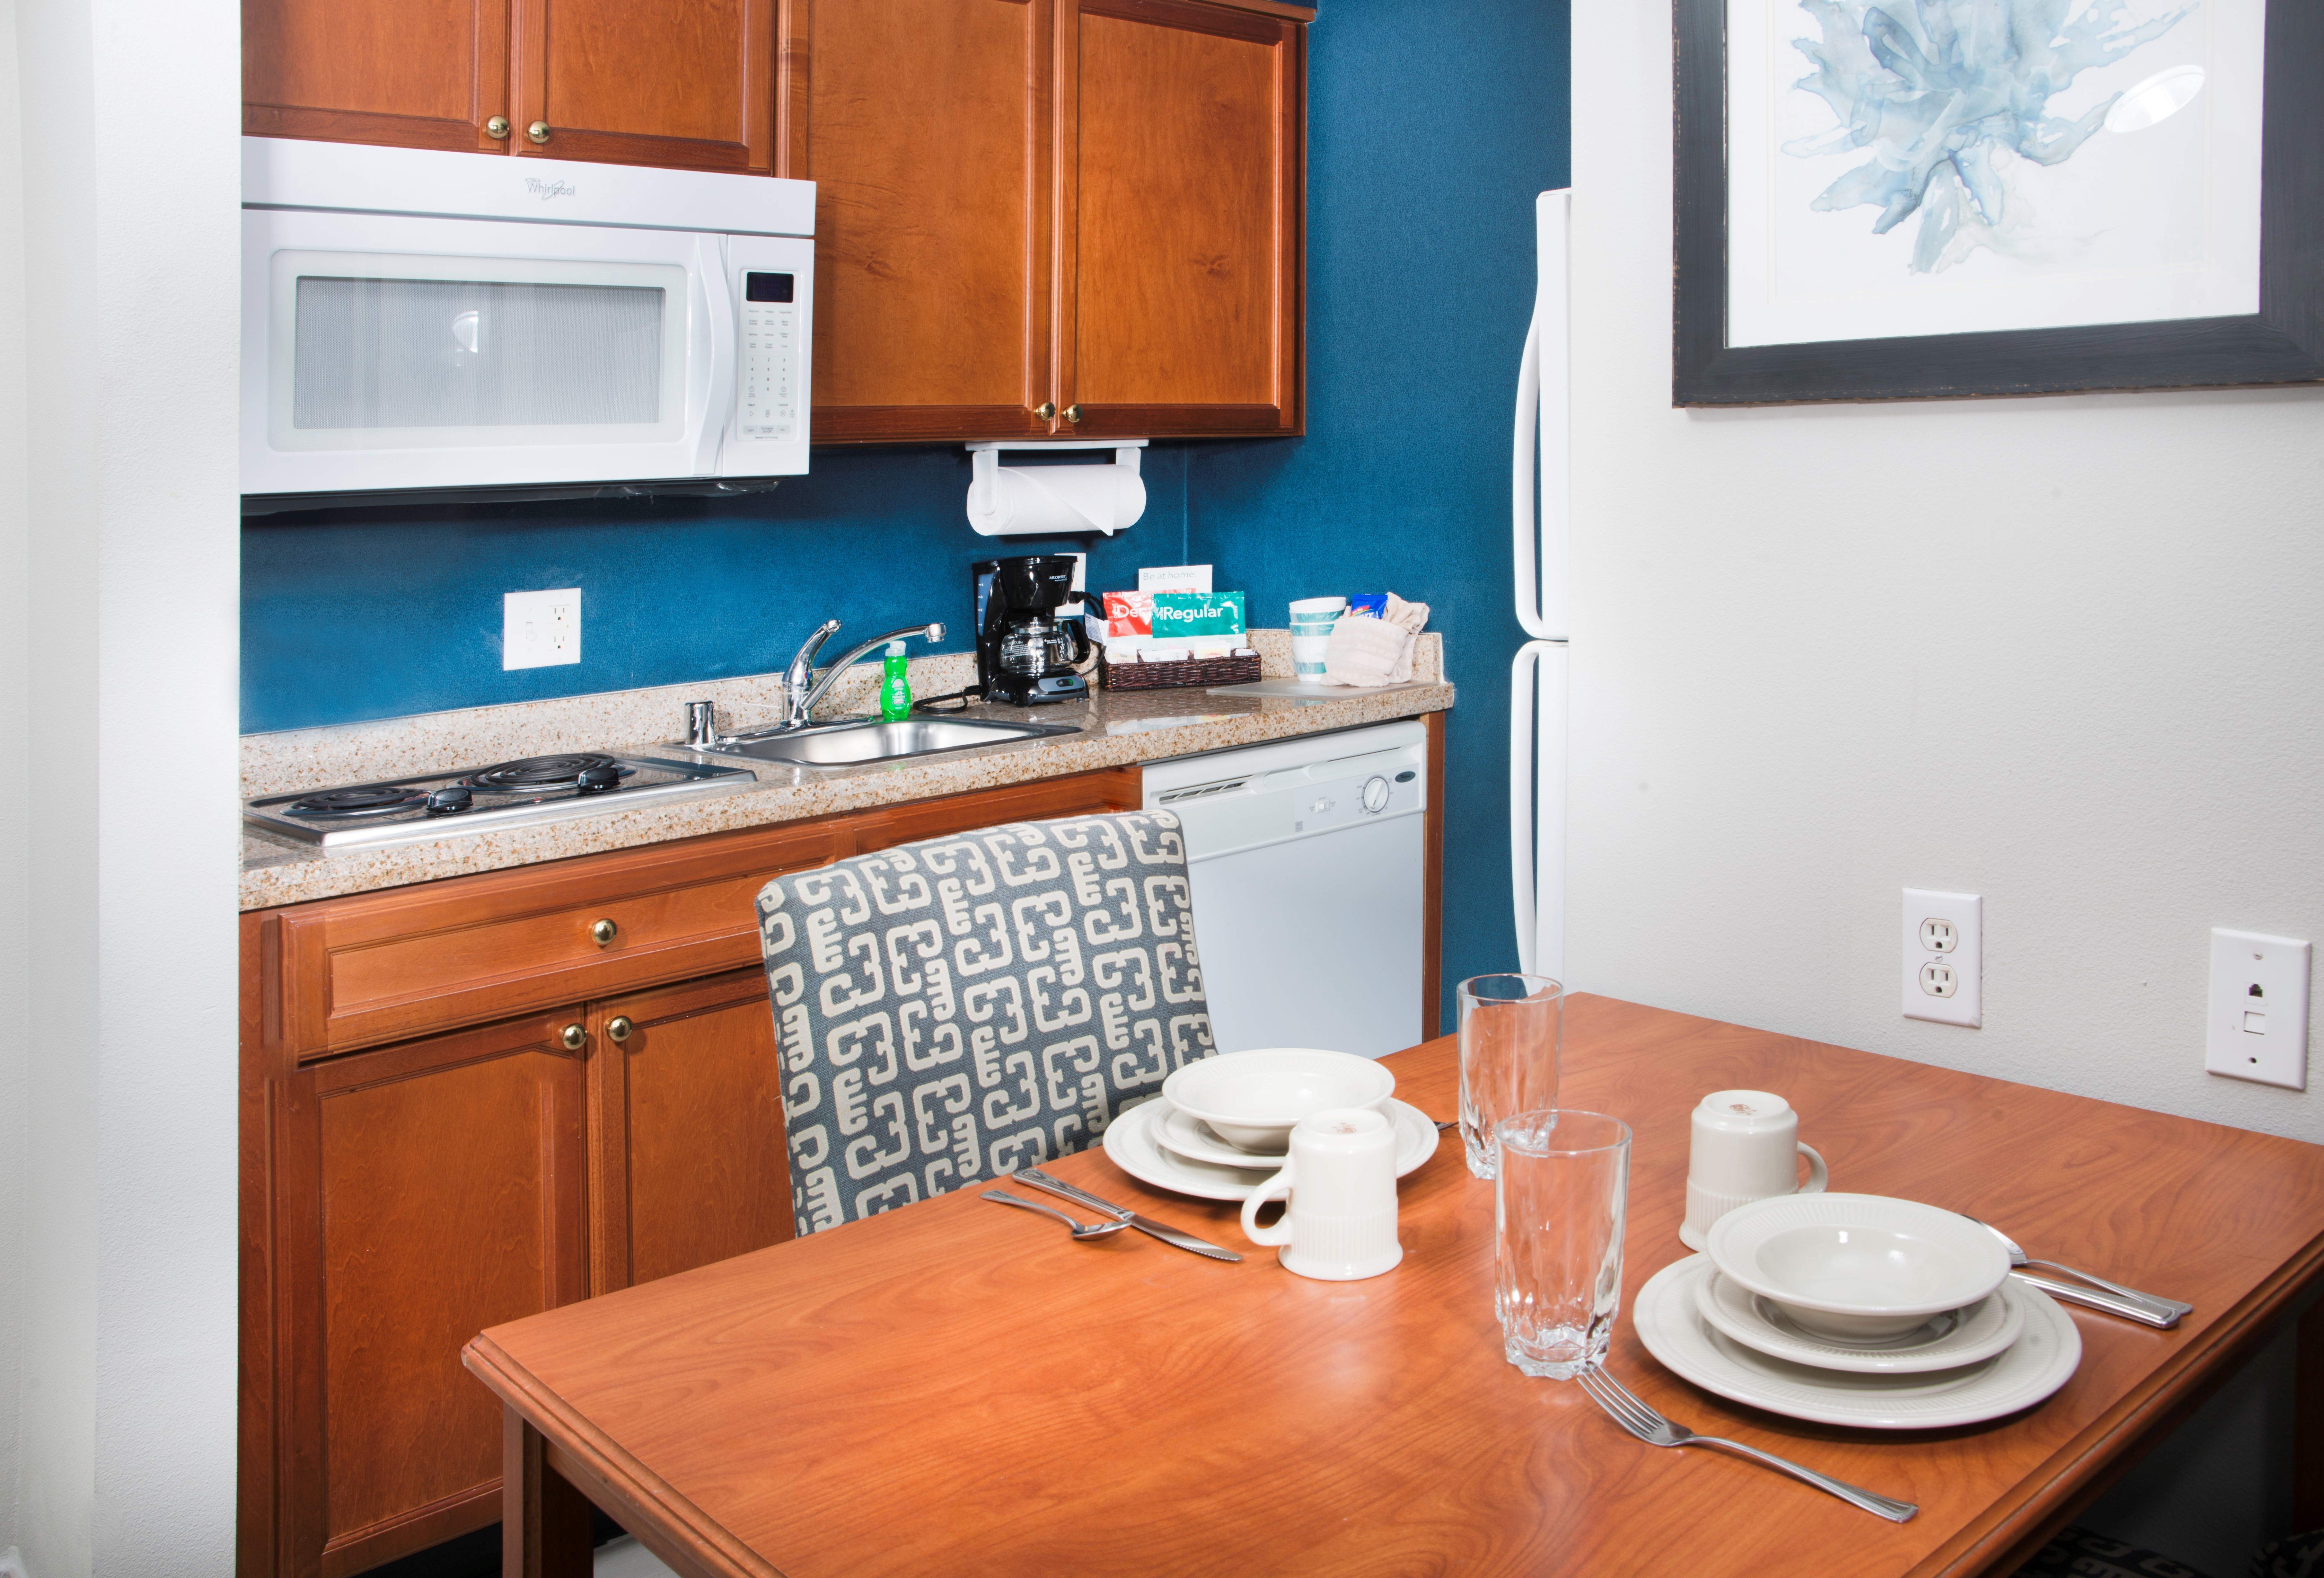 Guest Room Kitchen and Amenities 